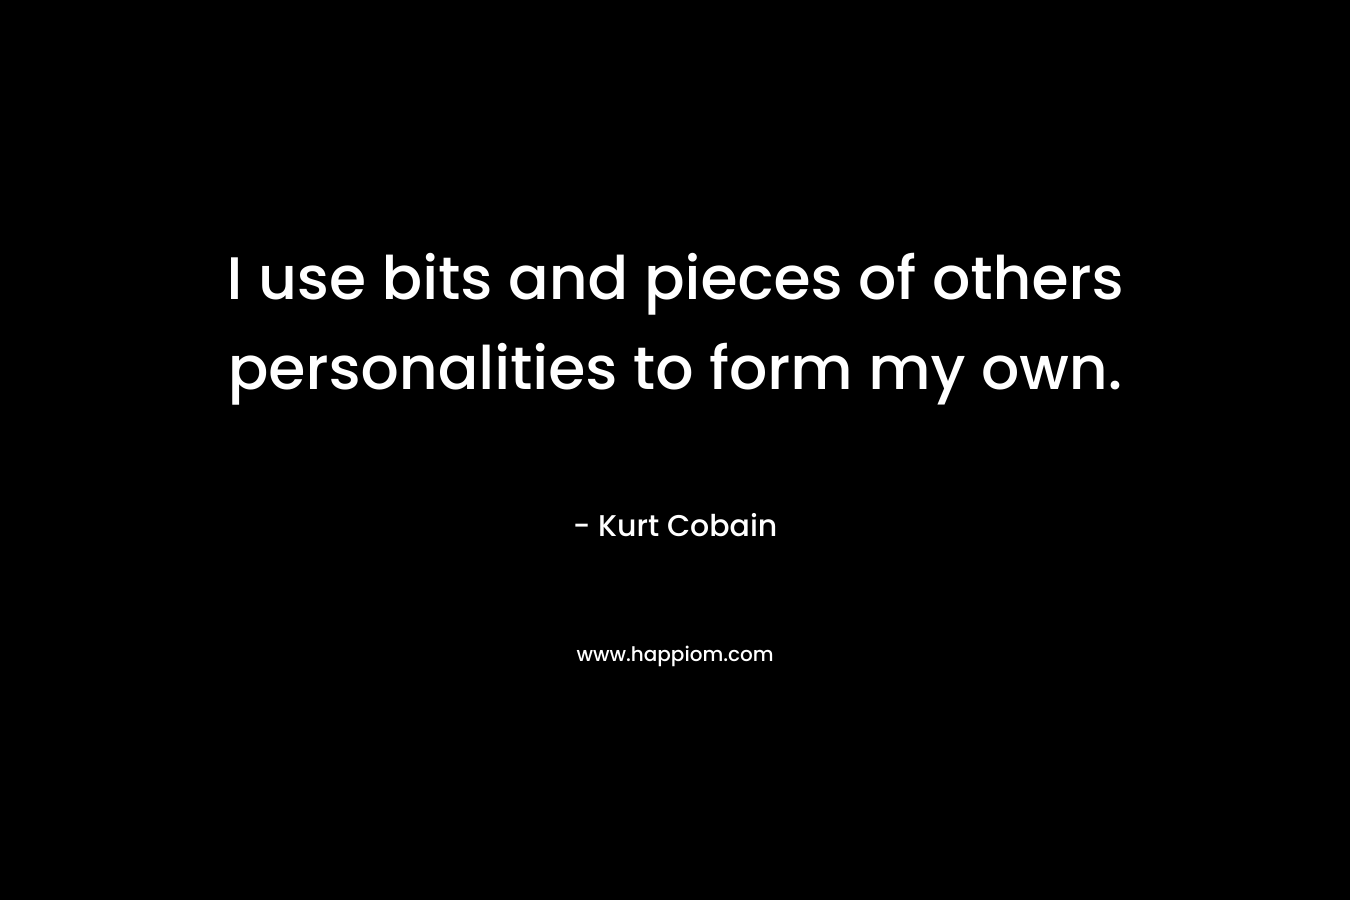 I use bits and pieces of others personalities to form my own.